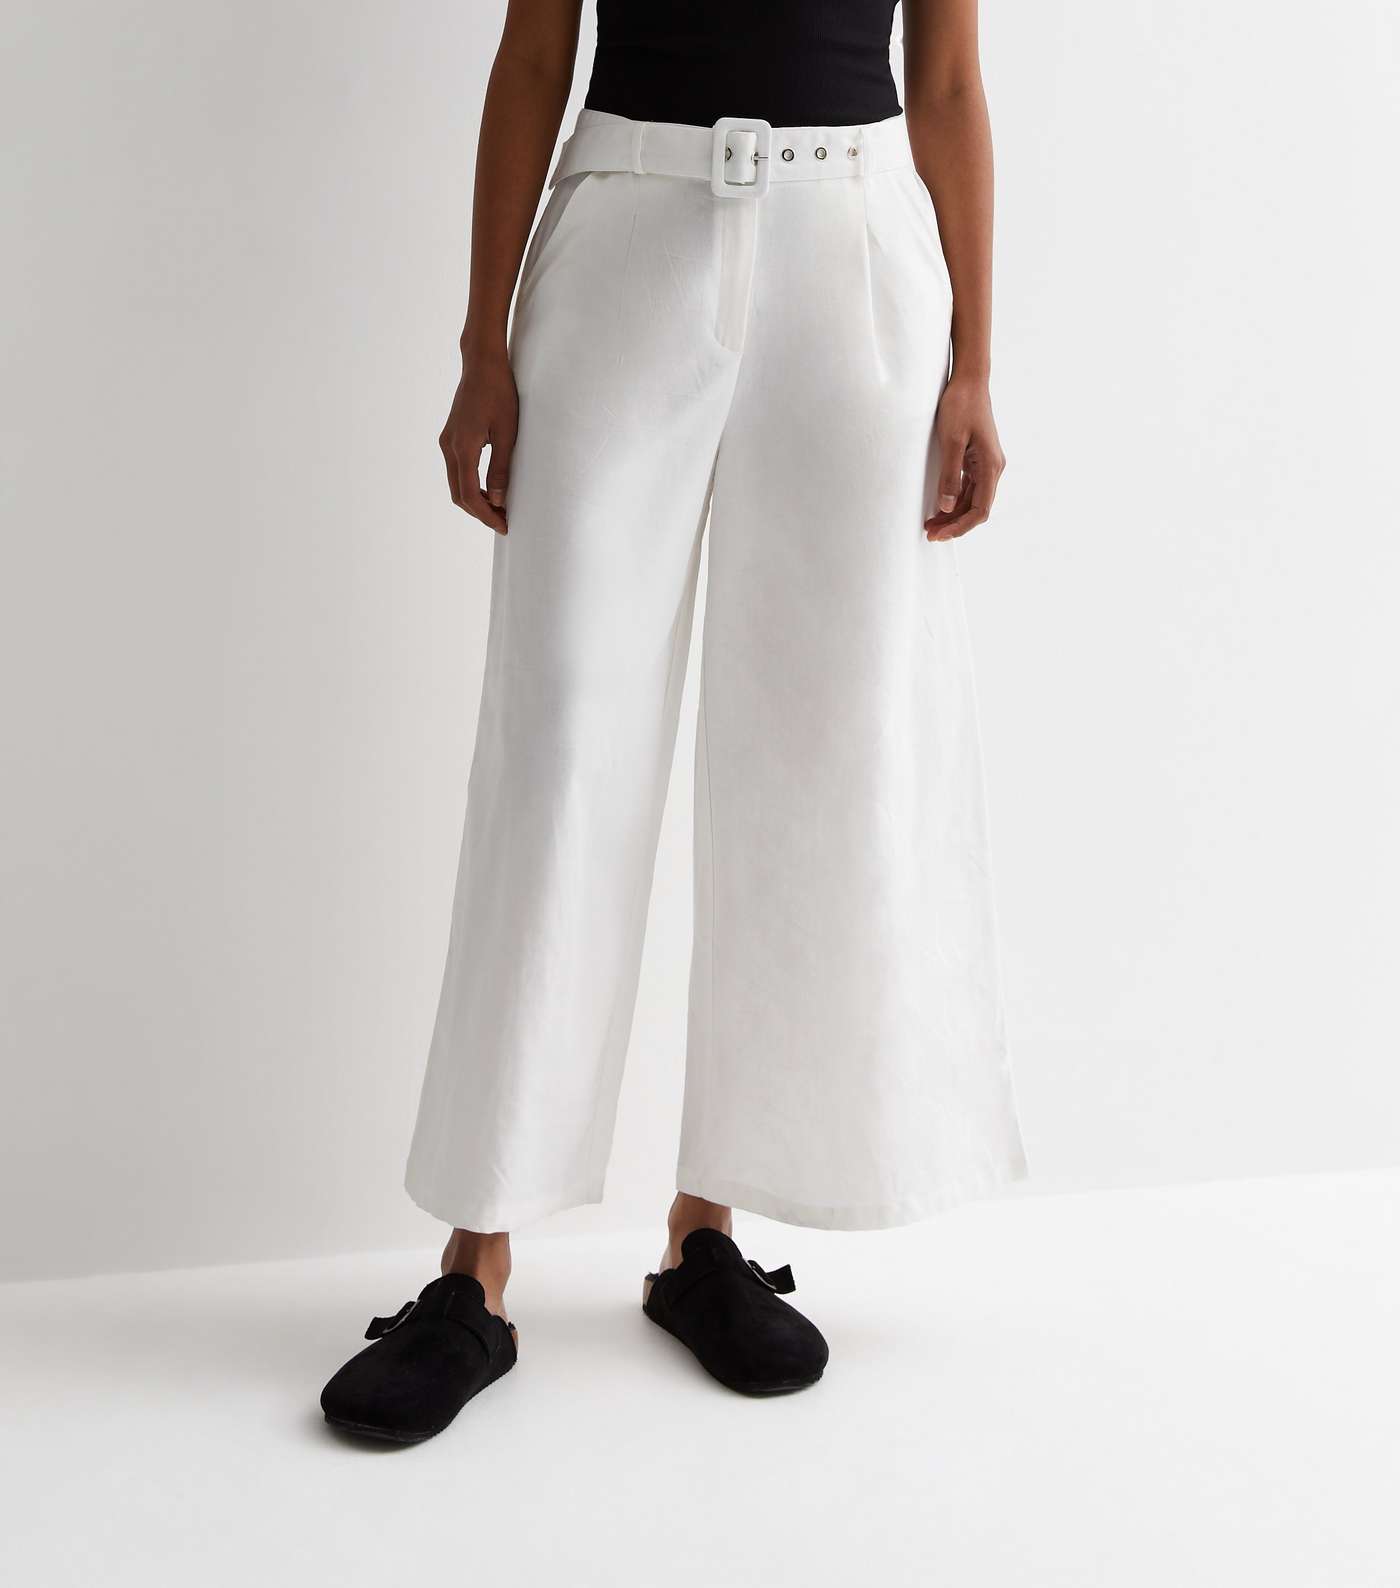 Gini London White Linen-Look Belted Wide Leg Trousers Image 3